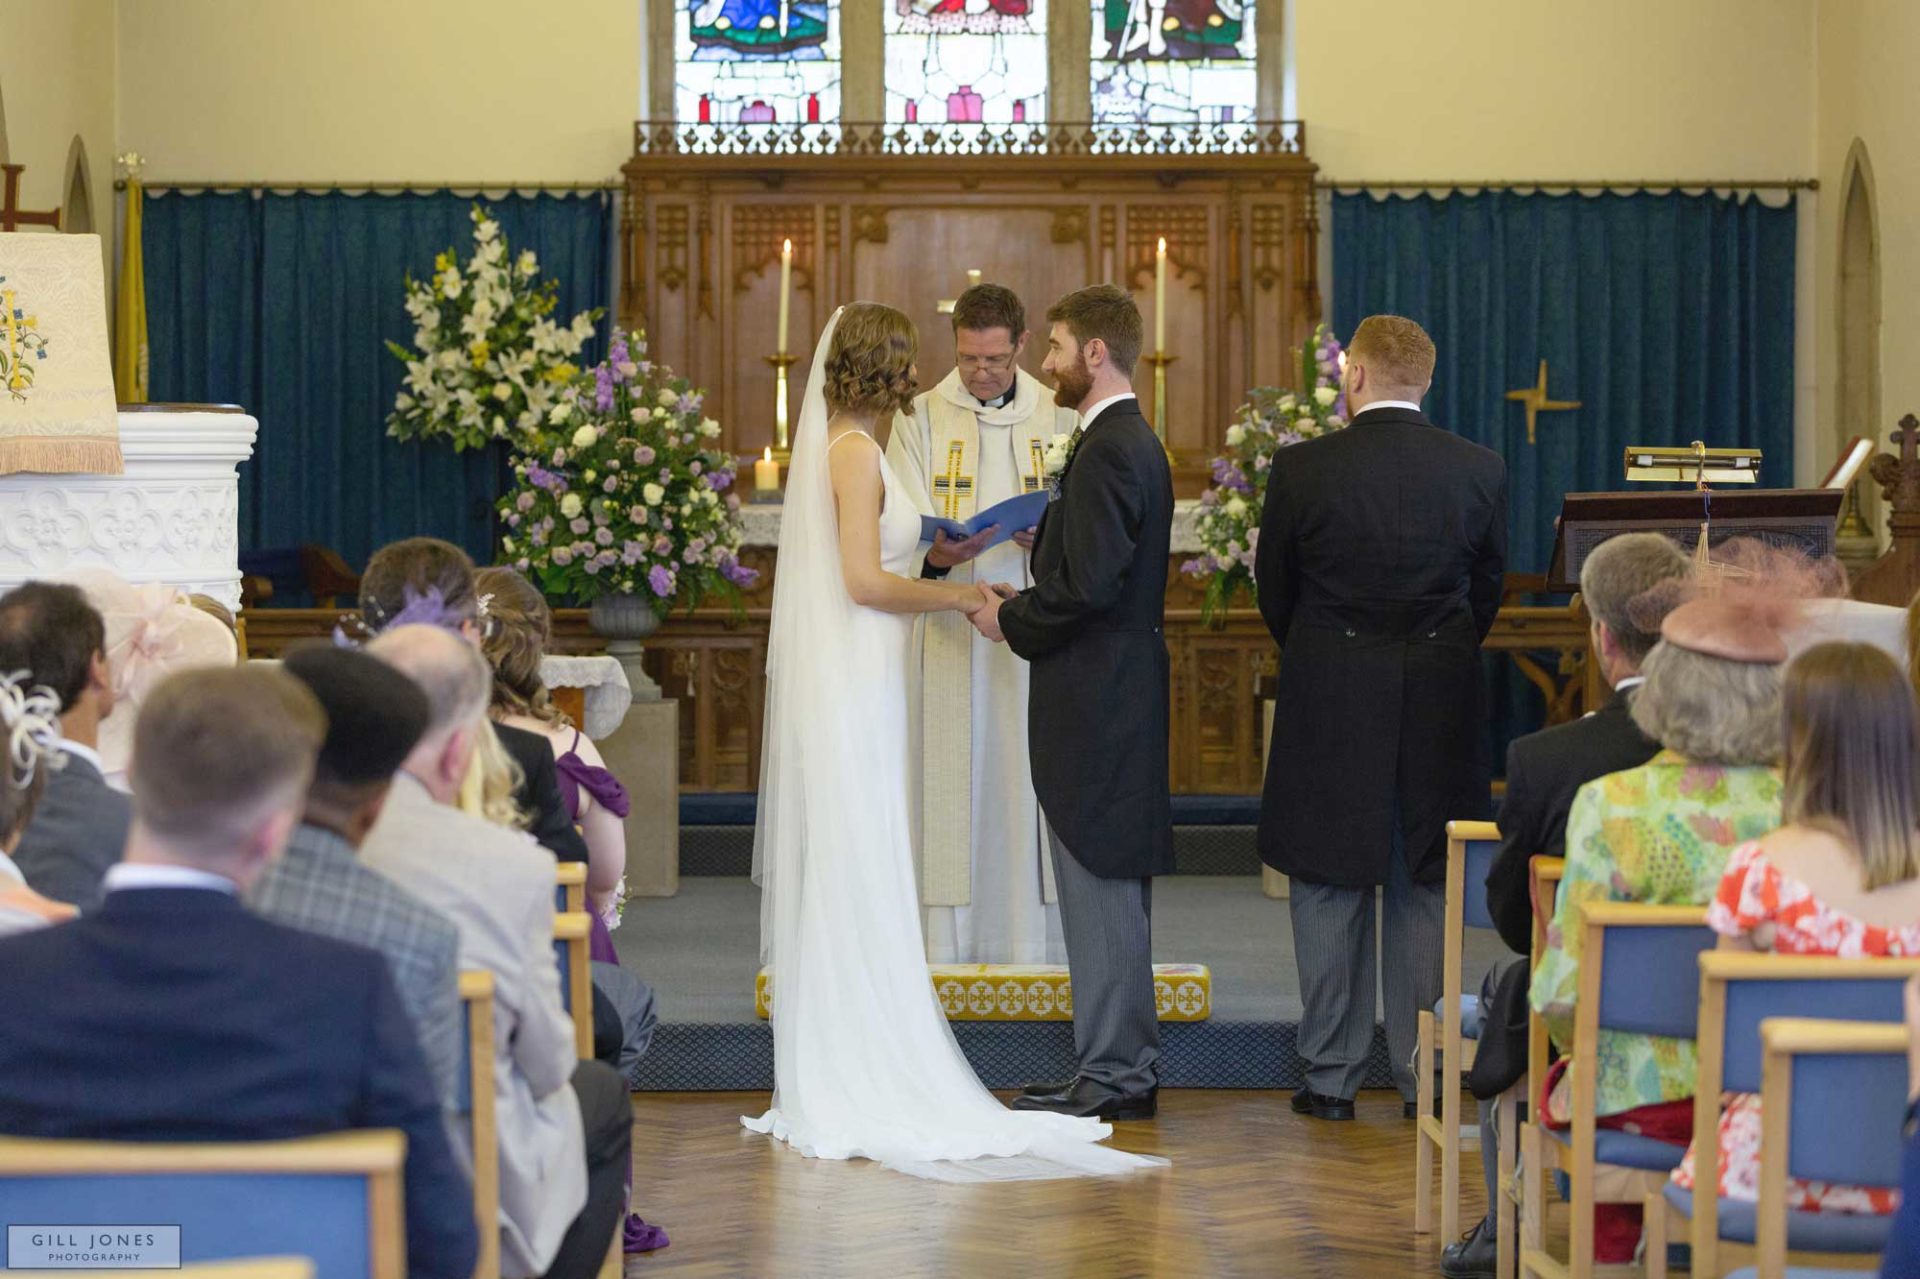 the bride and groom are repeating their vows to one another in St. Ffraids church, Trearddur Bay